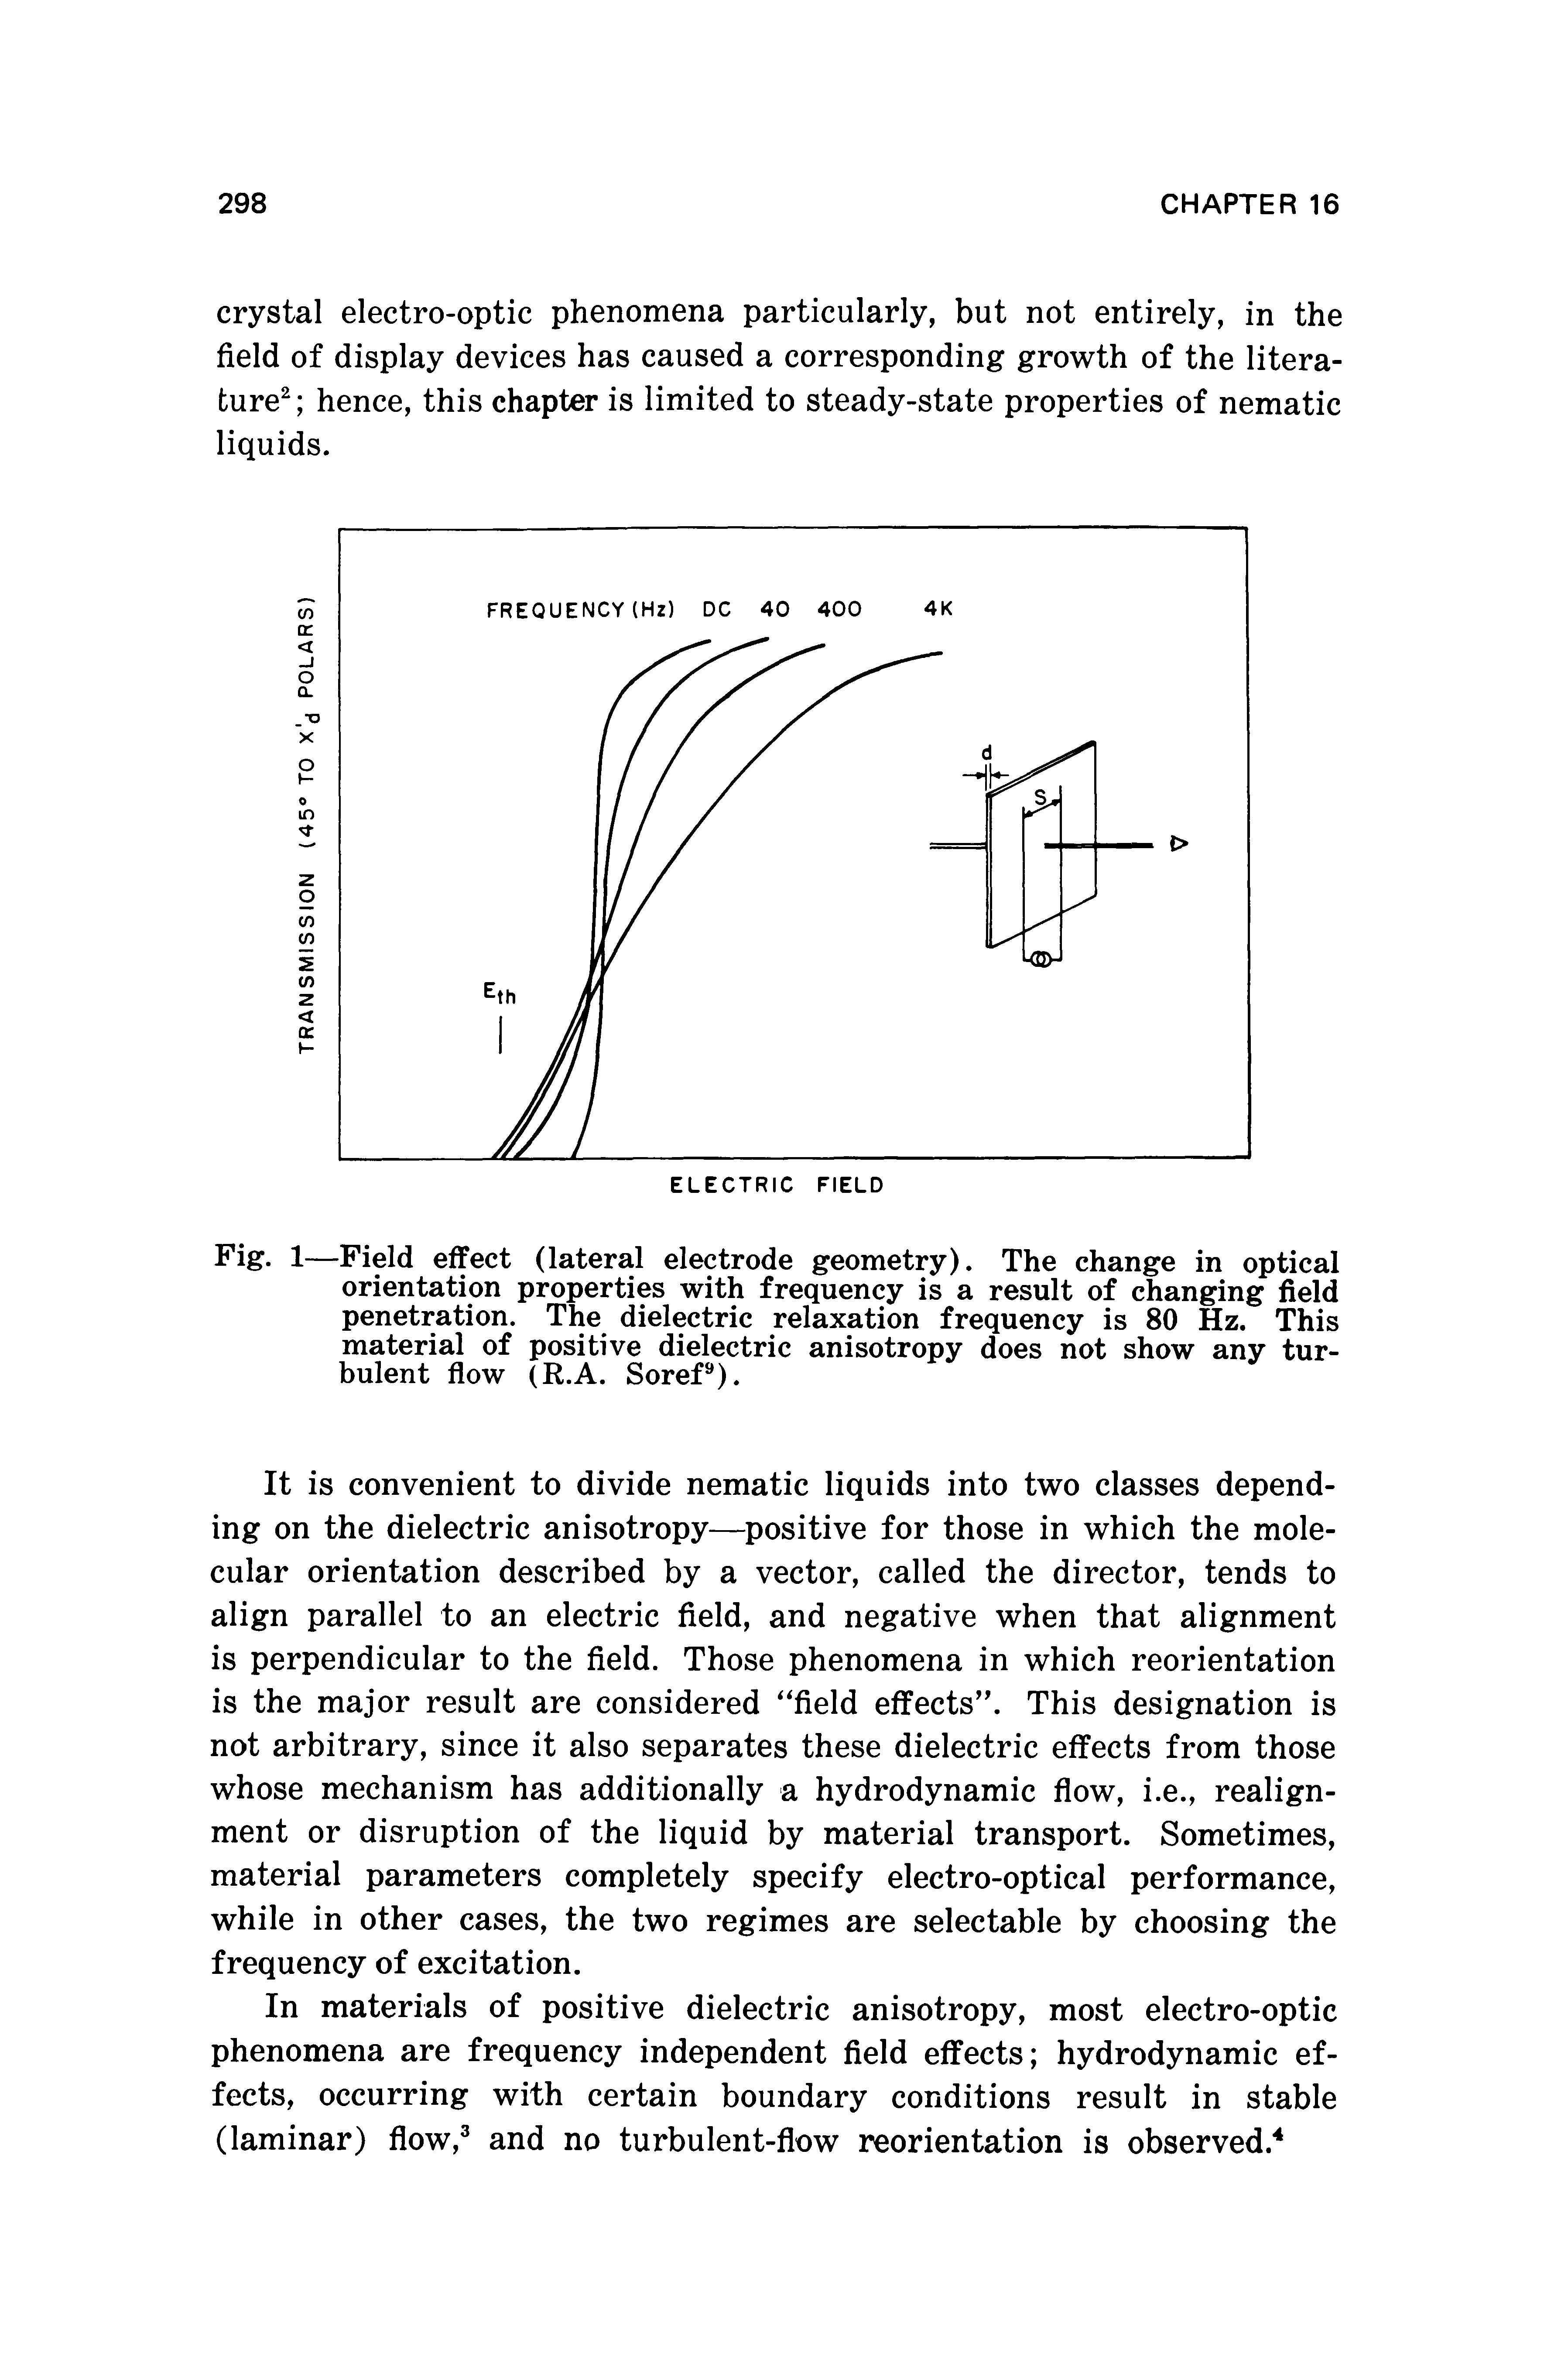 Fig. 1—Field effect (lateral electrode geometry). The change in optical orientation properties with frequency is a result of changing field penetration. The dielectric relaxation frequency is 80 Hz. This material of positive dielectric anisotropy does not show any turbulent flow (R.A. SoreP).